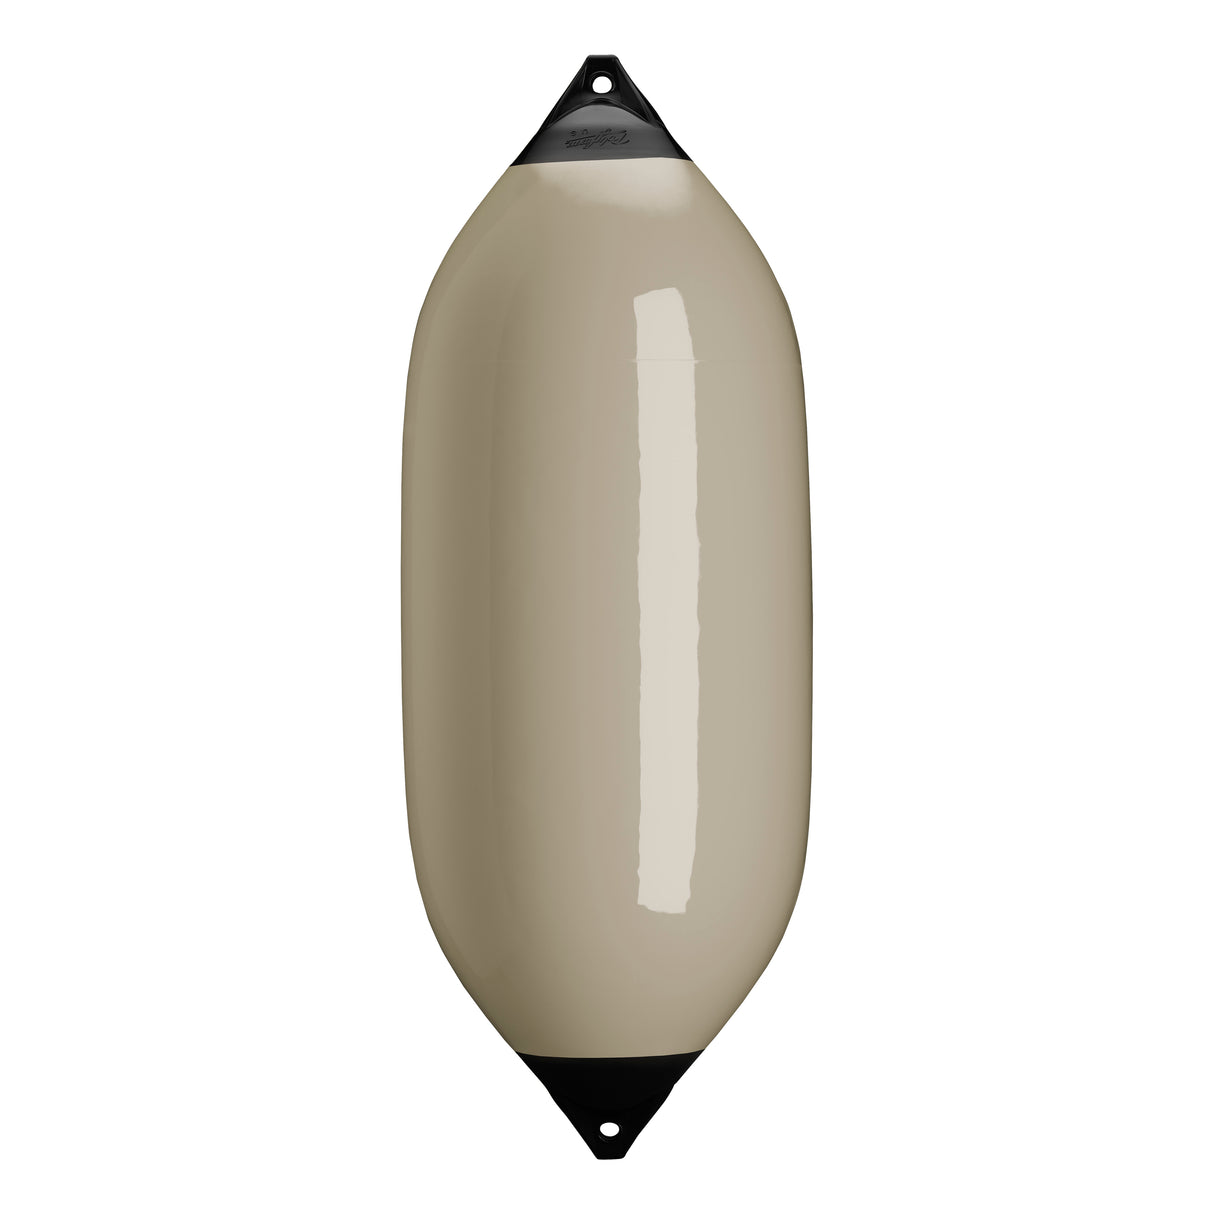 Sand boat fender with Navy-Top, Polyform F-13